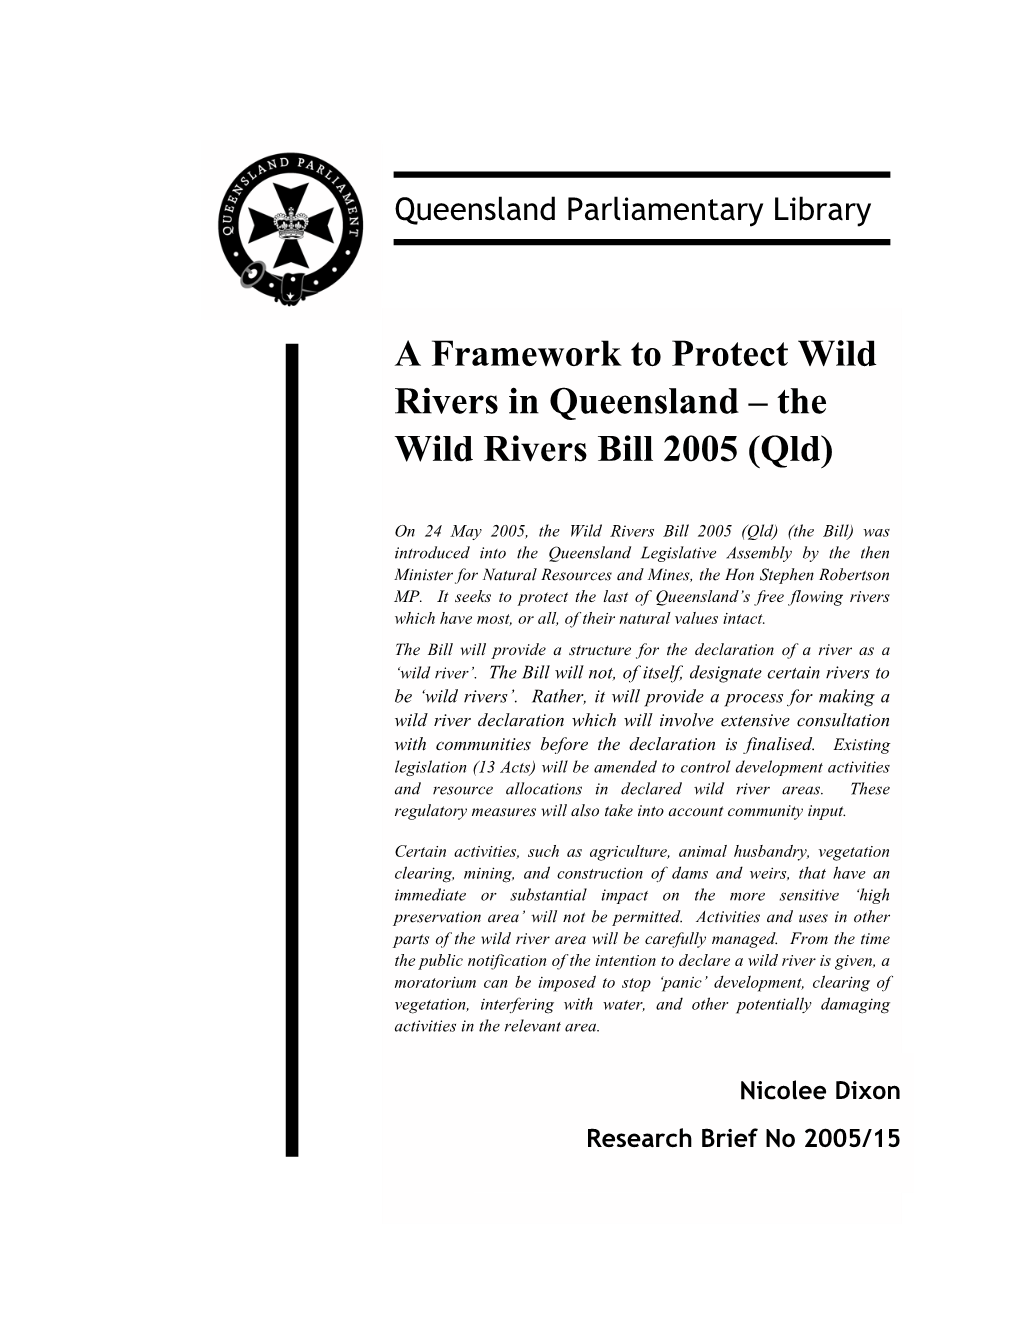 A Framework to Protect Wild Rivers in Queensland – the Wild Rivers Bill 2005 (Qld)